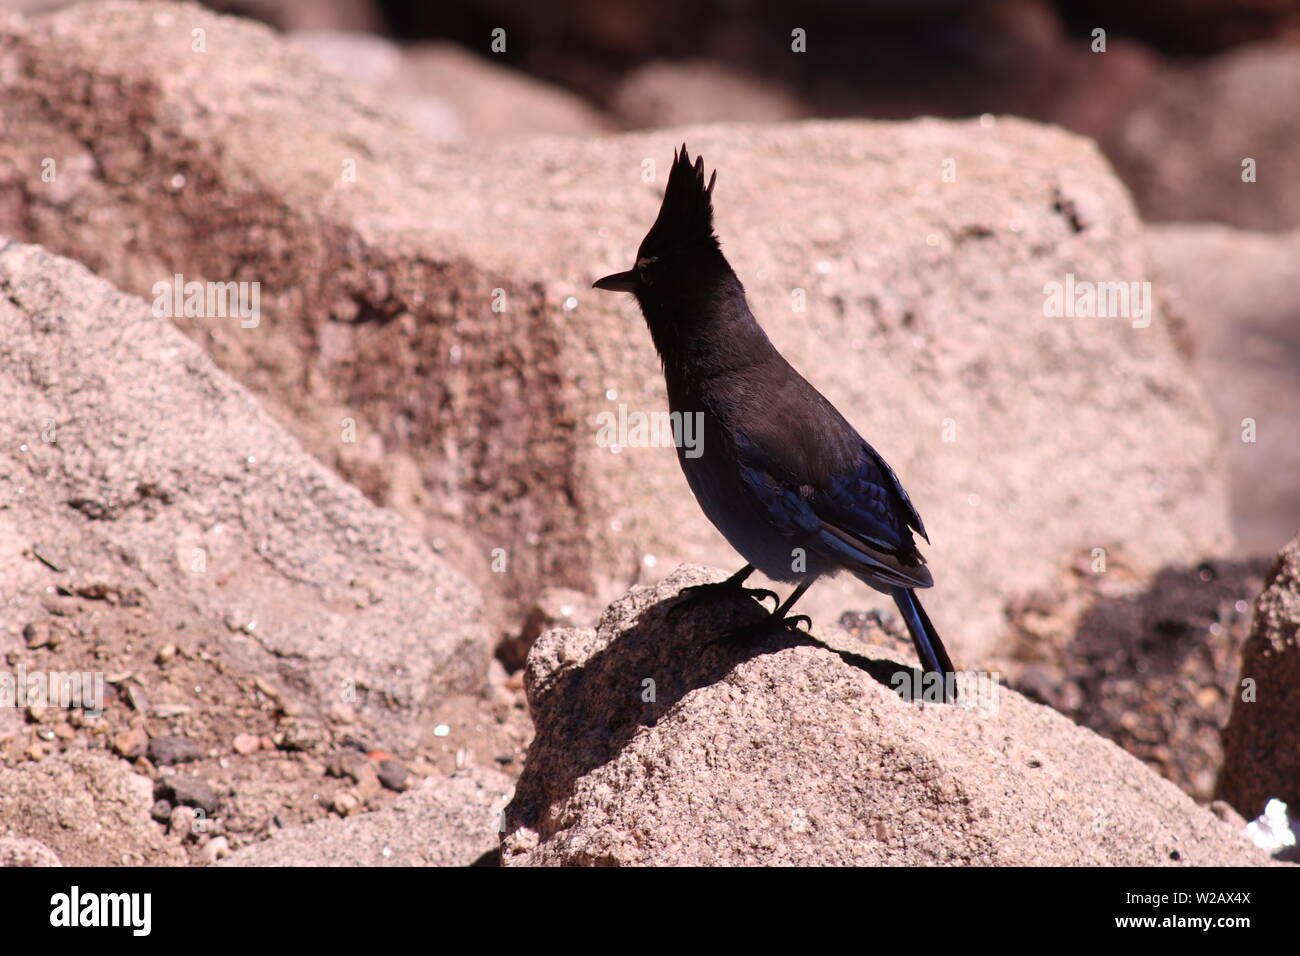 A Bluejay (Cyanocitta cristata) at the Estes Park Welcome sign Stock Photo